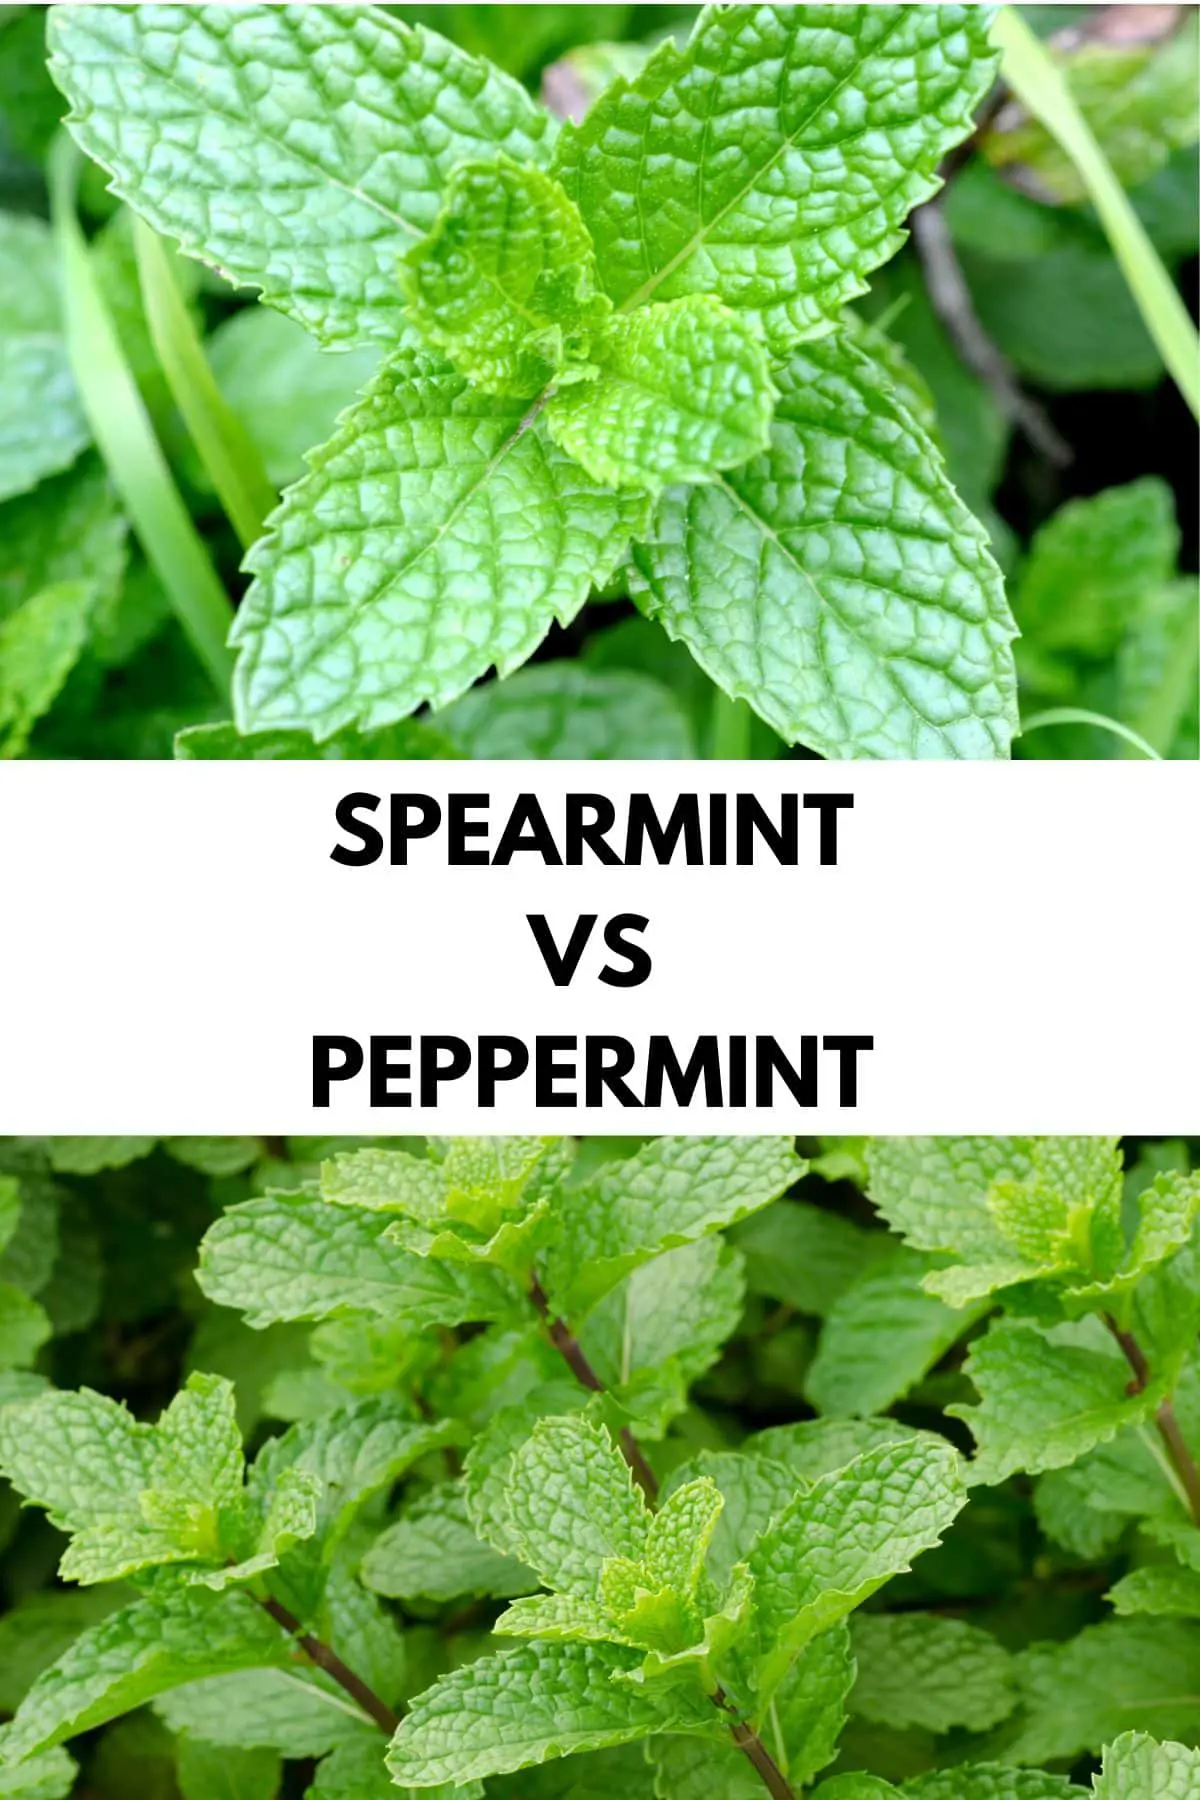 Spearmint Vs Peppermint: Differences and Health Benefits - Healthier Steps